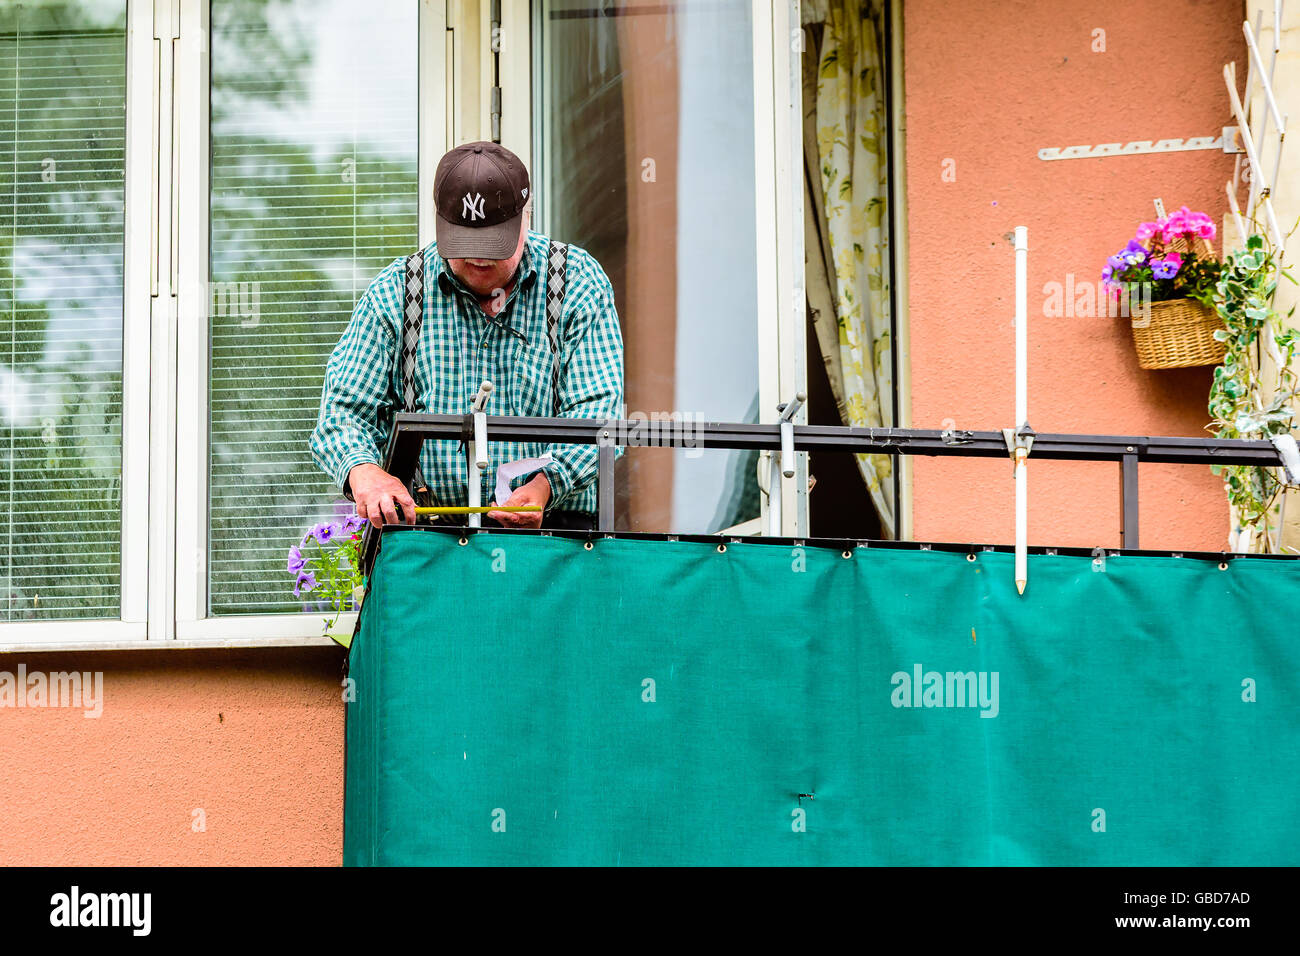 Motala, Sweden -June 21, 2016: Senior man measuring at a balcony. Ha has a small piece of paper in his hand as well. Stock Photo